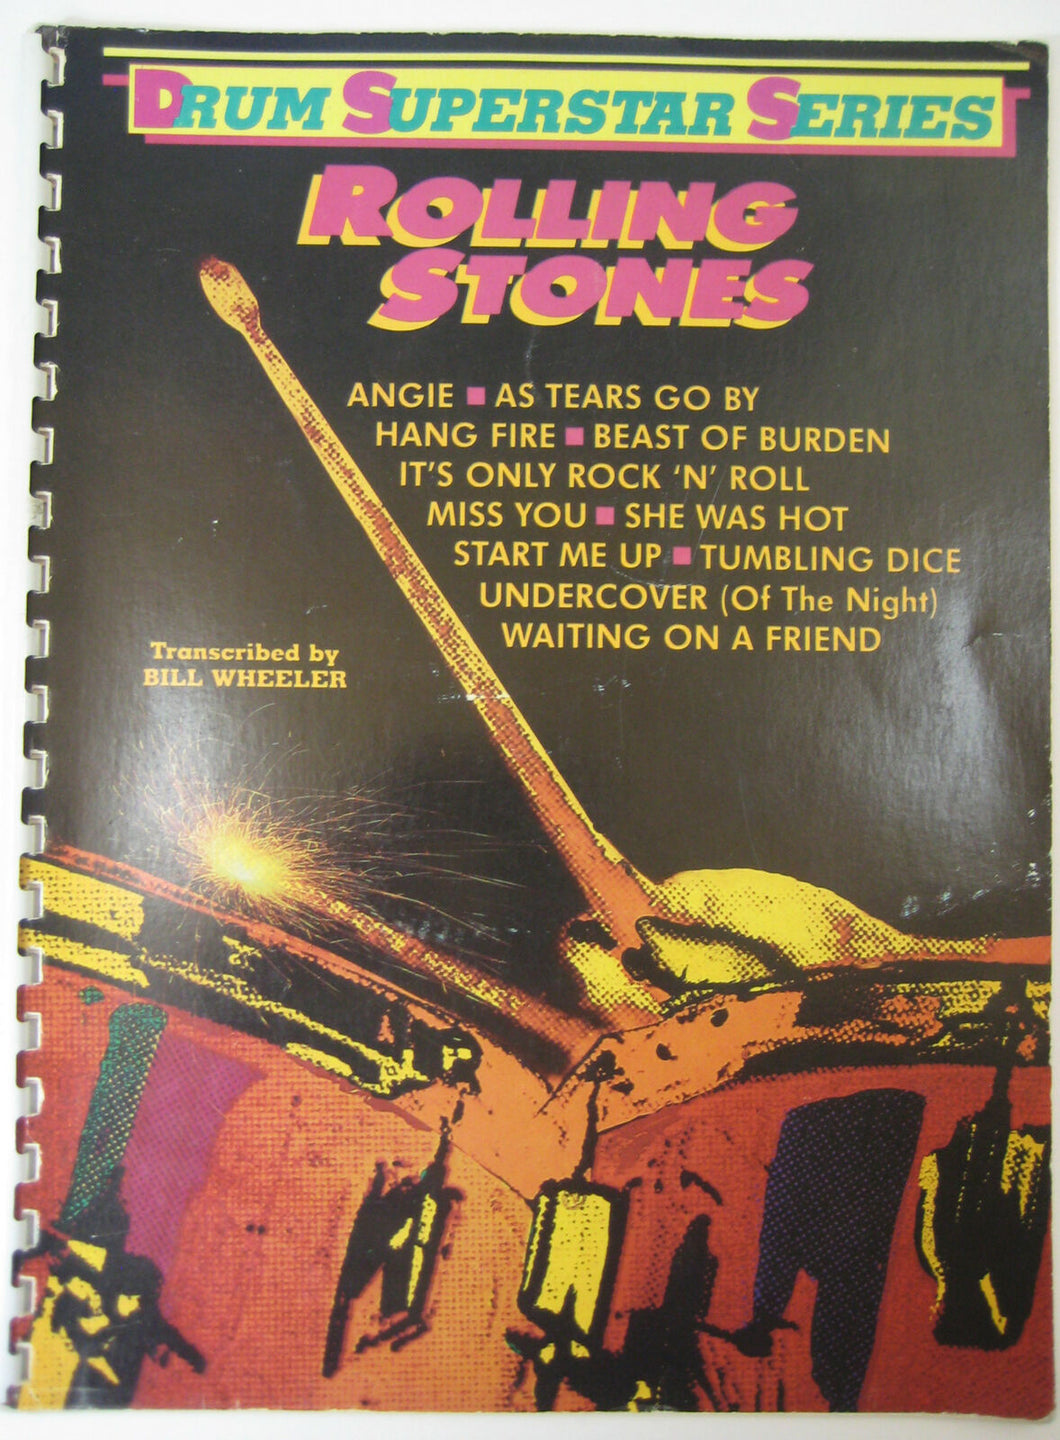 Tumbling Dice - The Rolling Stones - Collection of Drum Transcriptions / Drum Sheet Music - Warner Bros. RSDSS